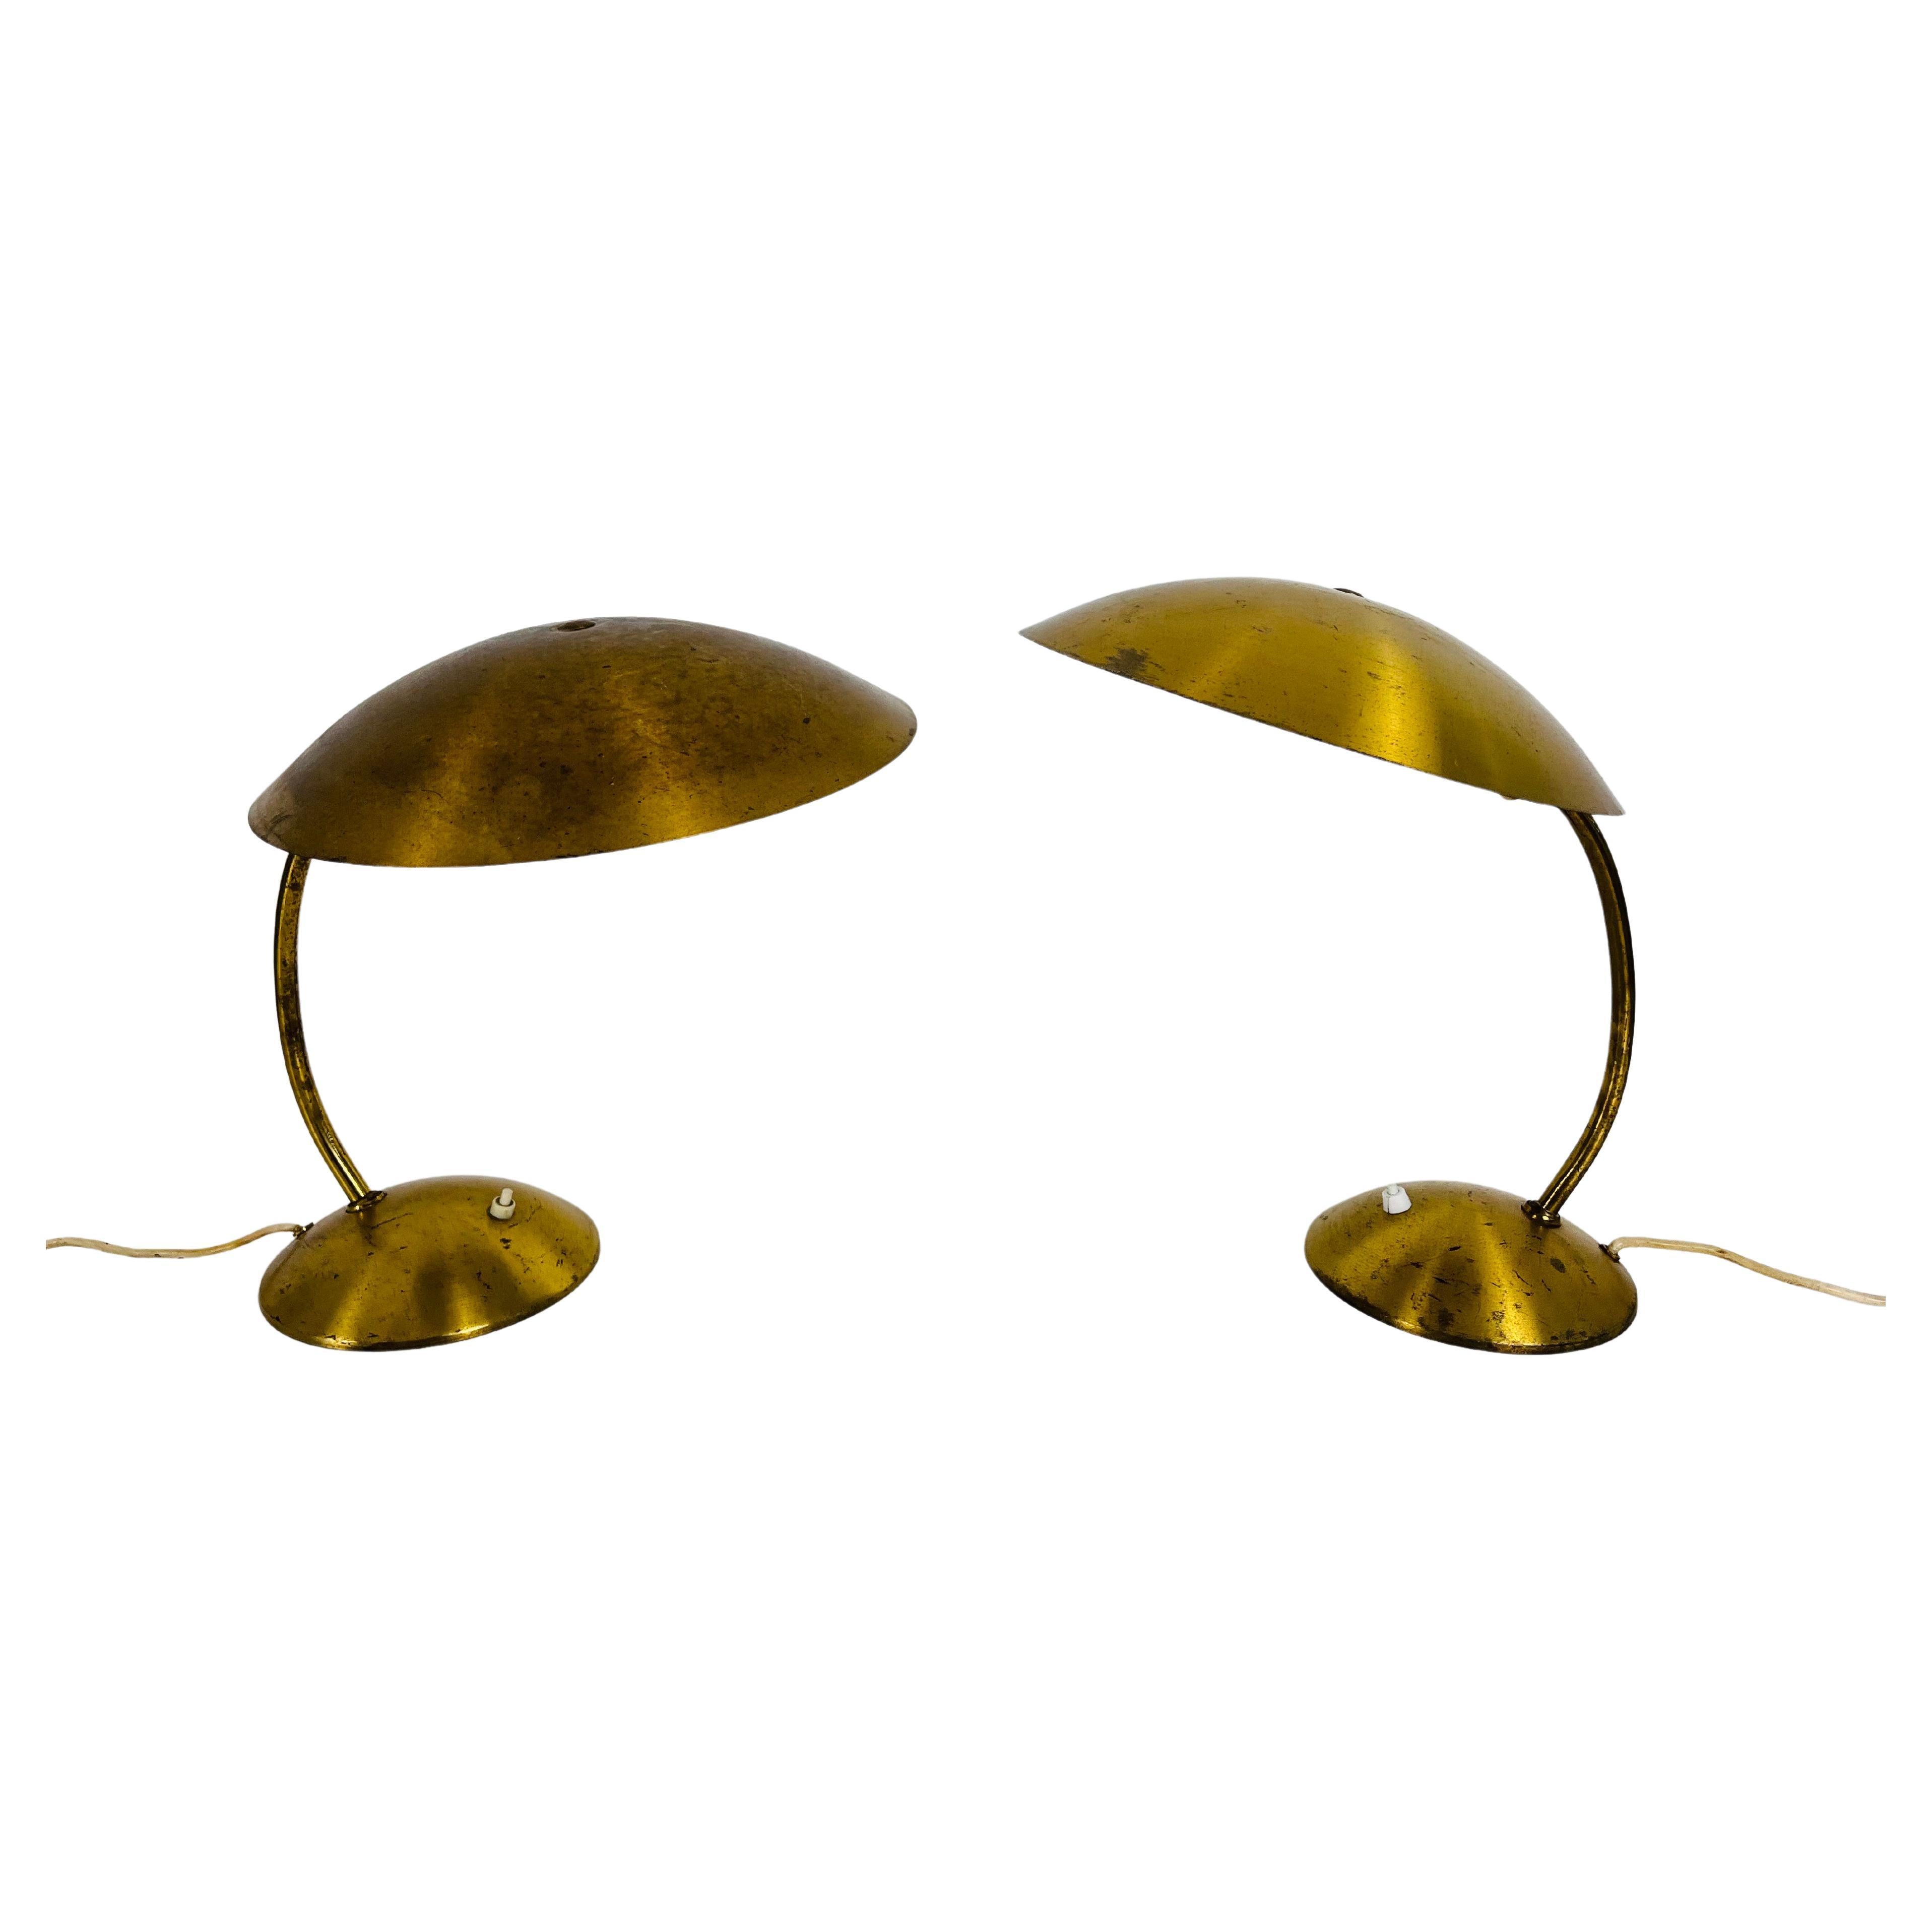 Extraordinary Mid-Century Modern Kaiser Brass Table Lamps, Pair, 1960s For Sale